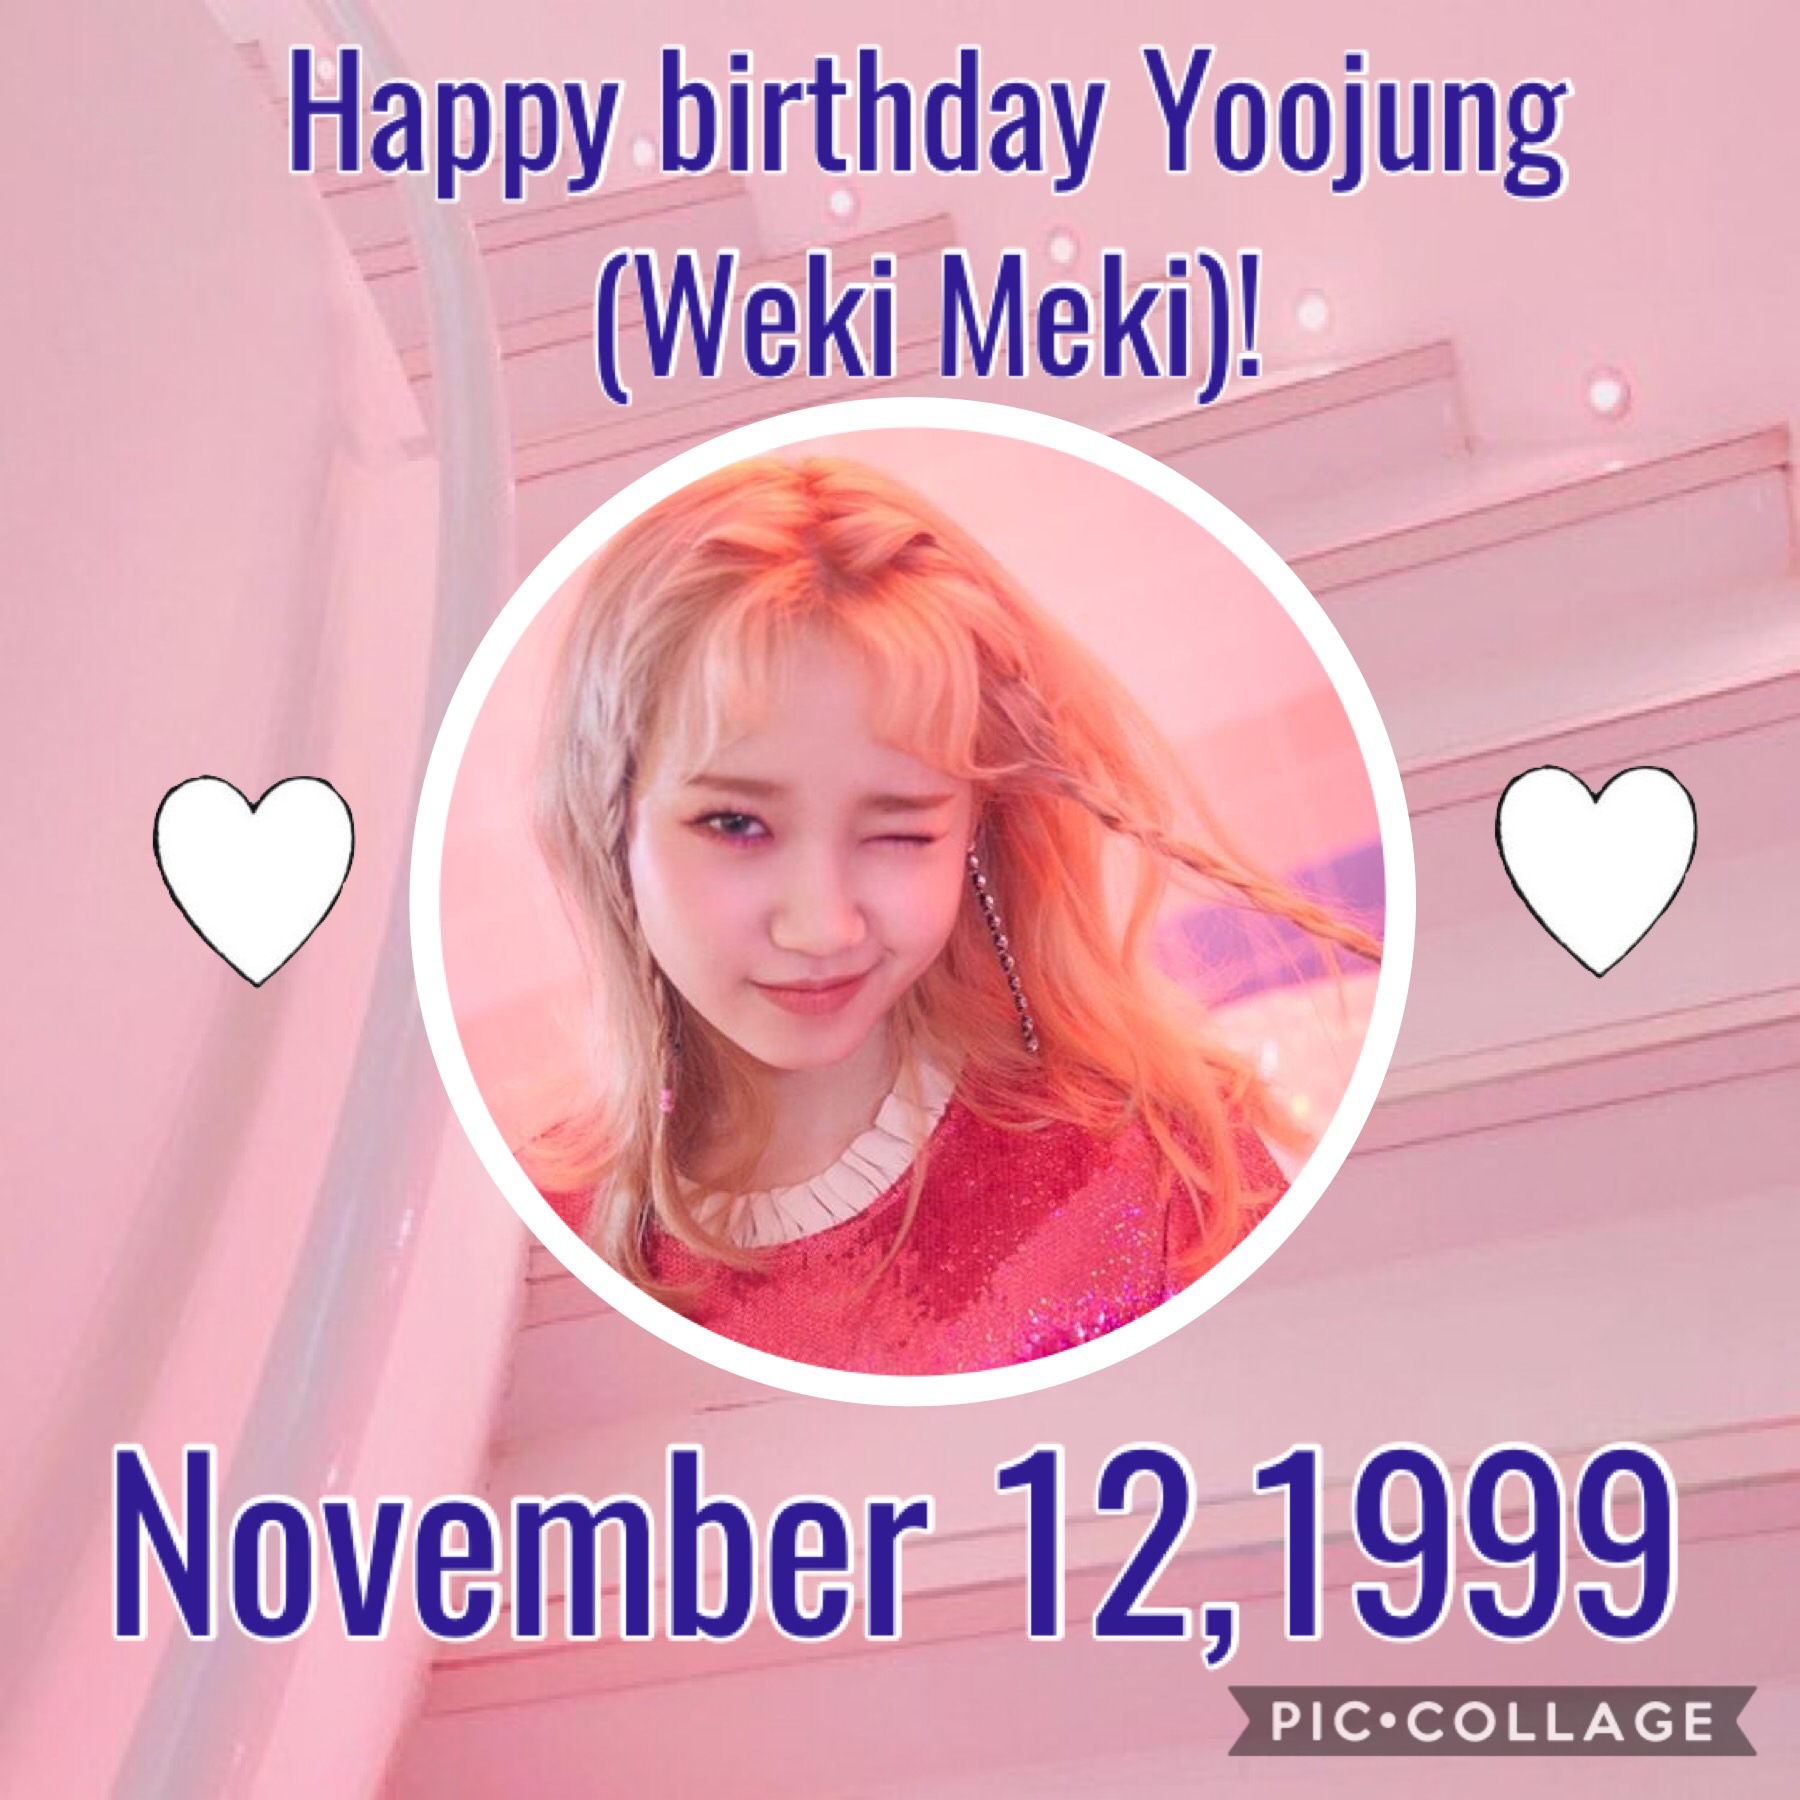 •Choi Yoojung•
Happy birthday!💞 Omg sHes sooooo talented! She was also apart of I.O.I and she happened to be one of my MANY biases in that group lol
Now she is currently in Weki Meki so please support them😊
~Whoop